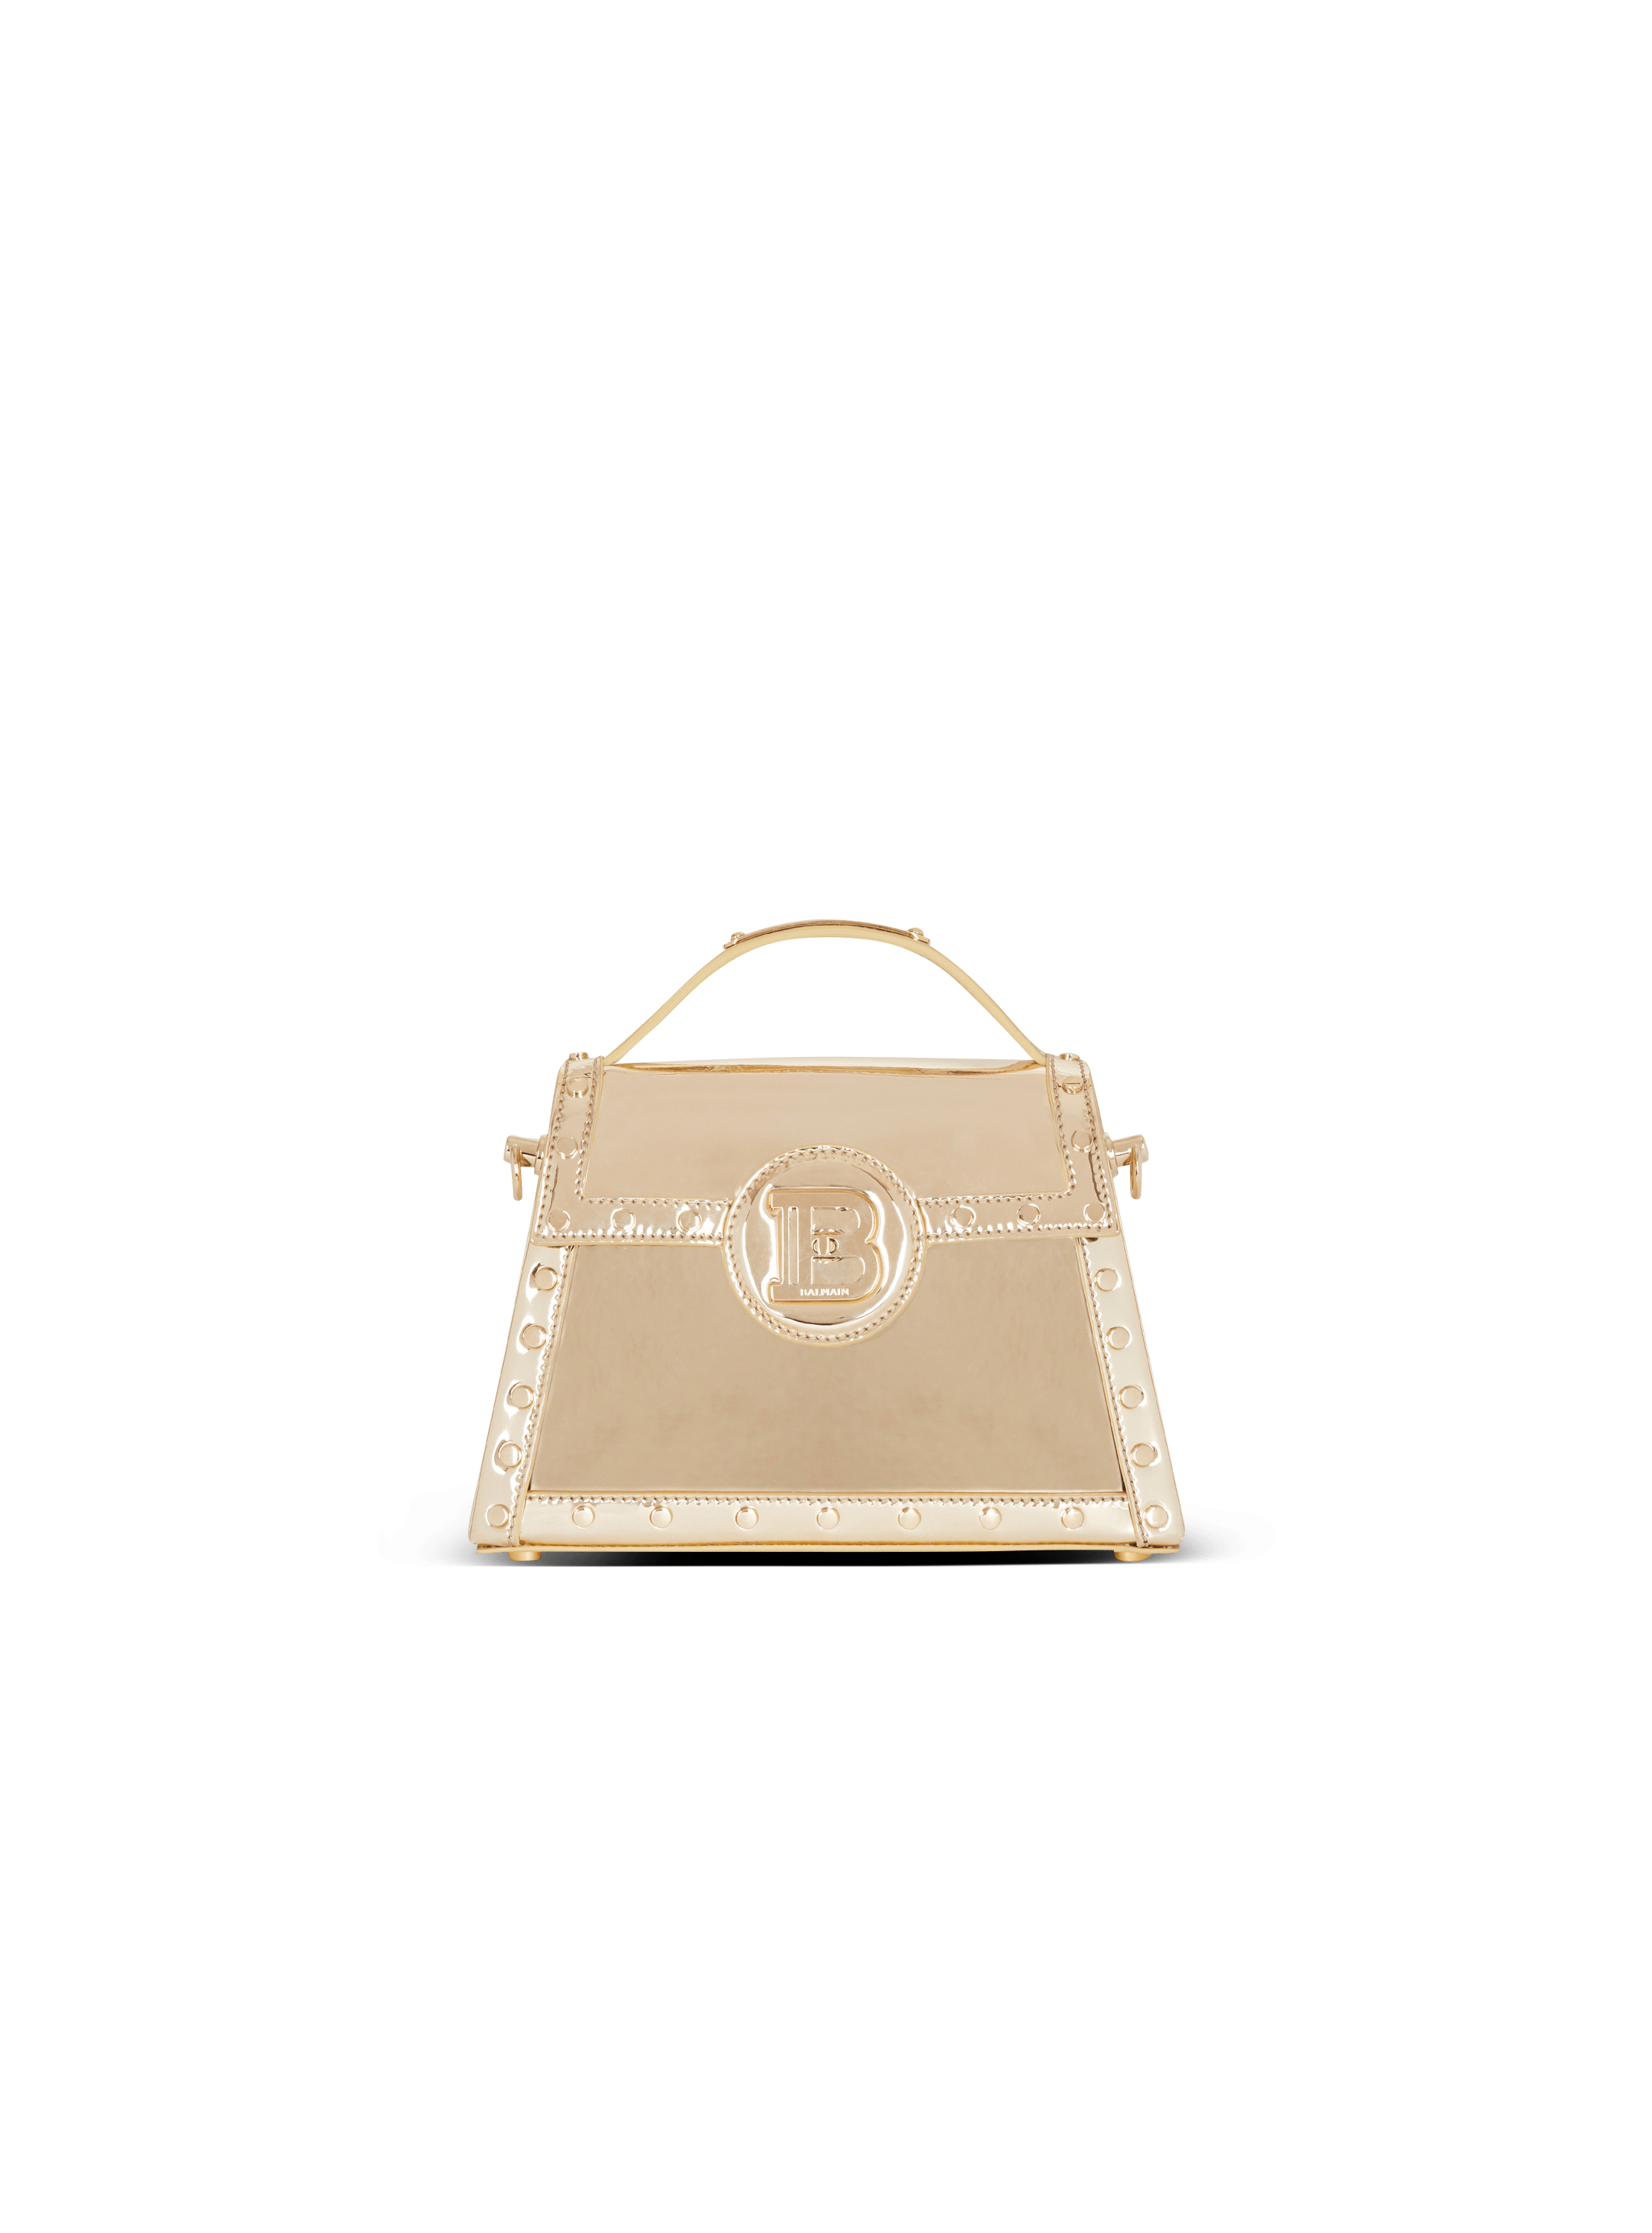 B-Buzz Dynasty bag in patent leather